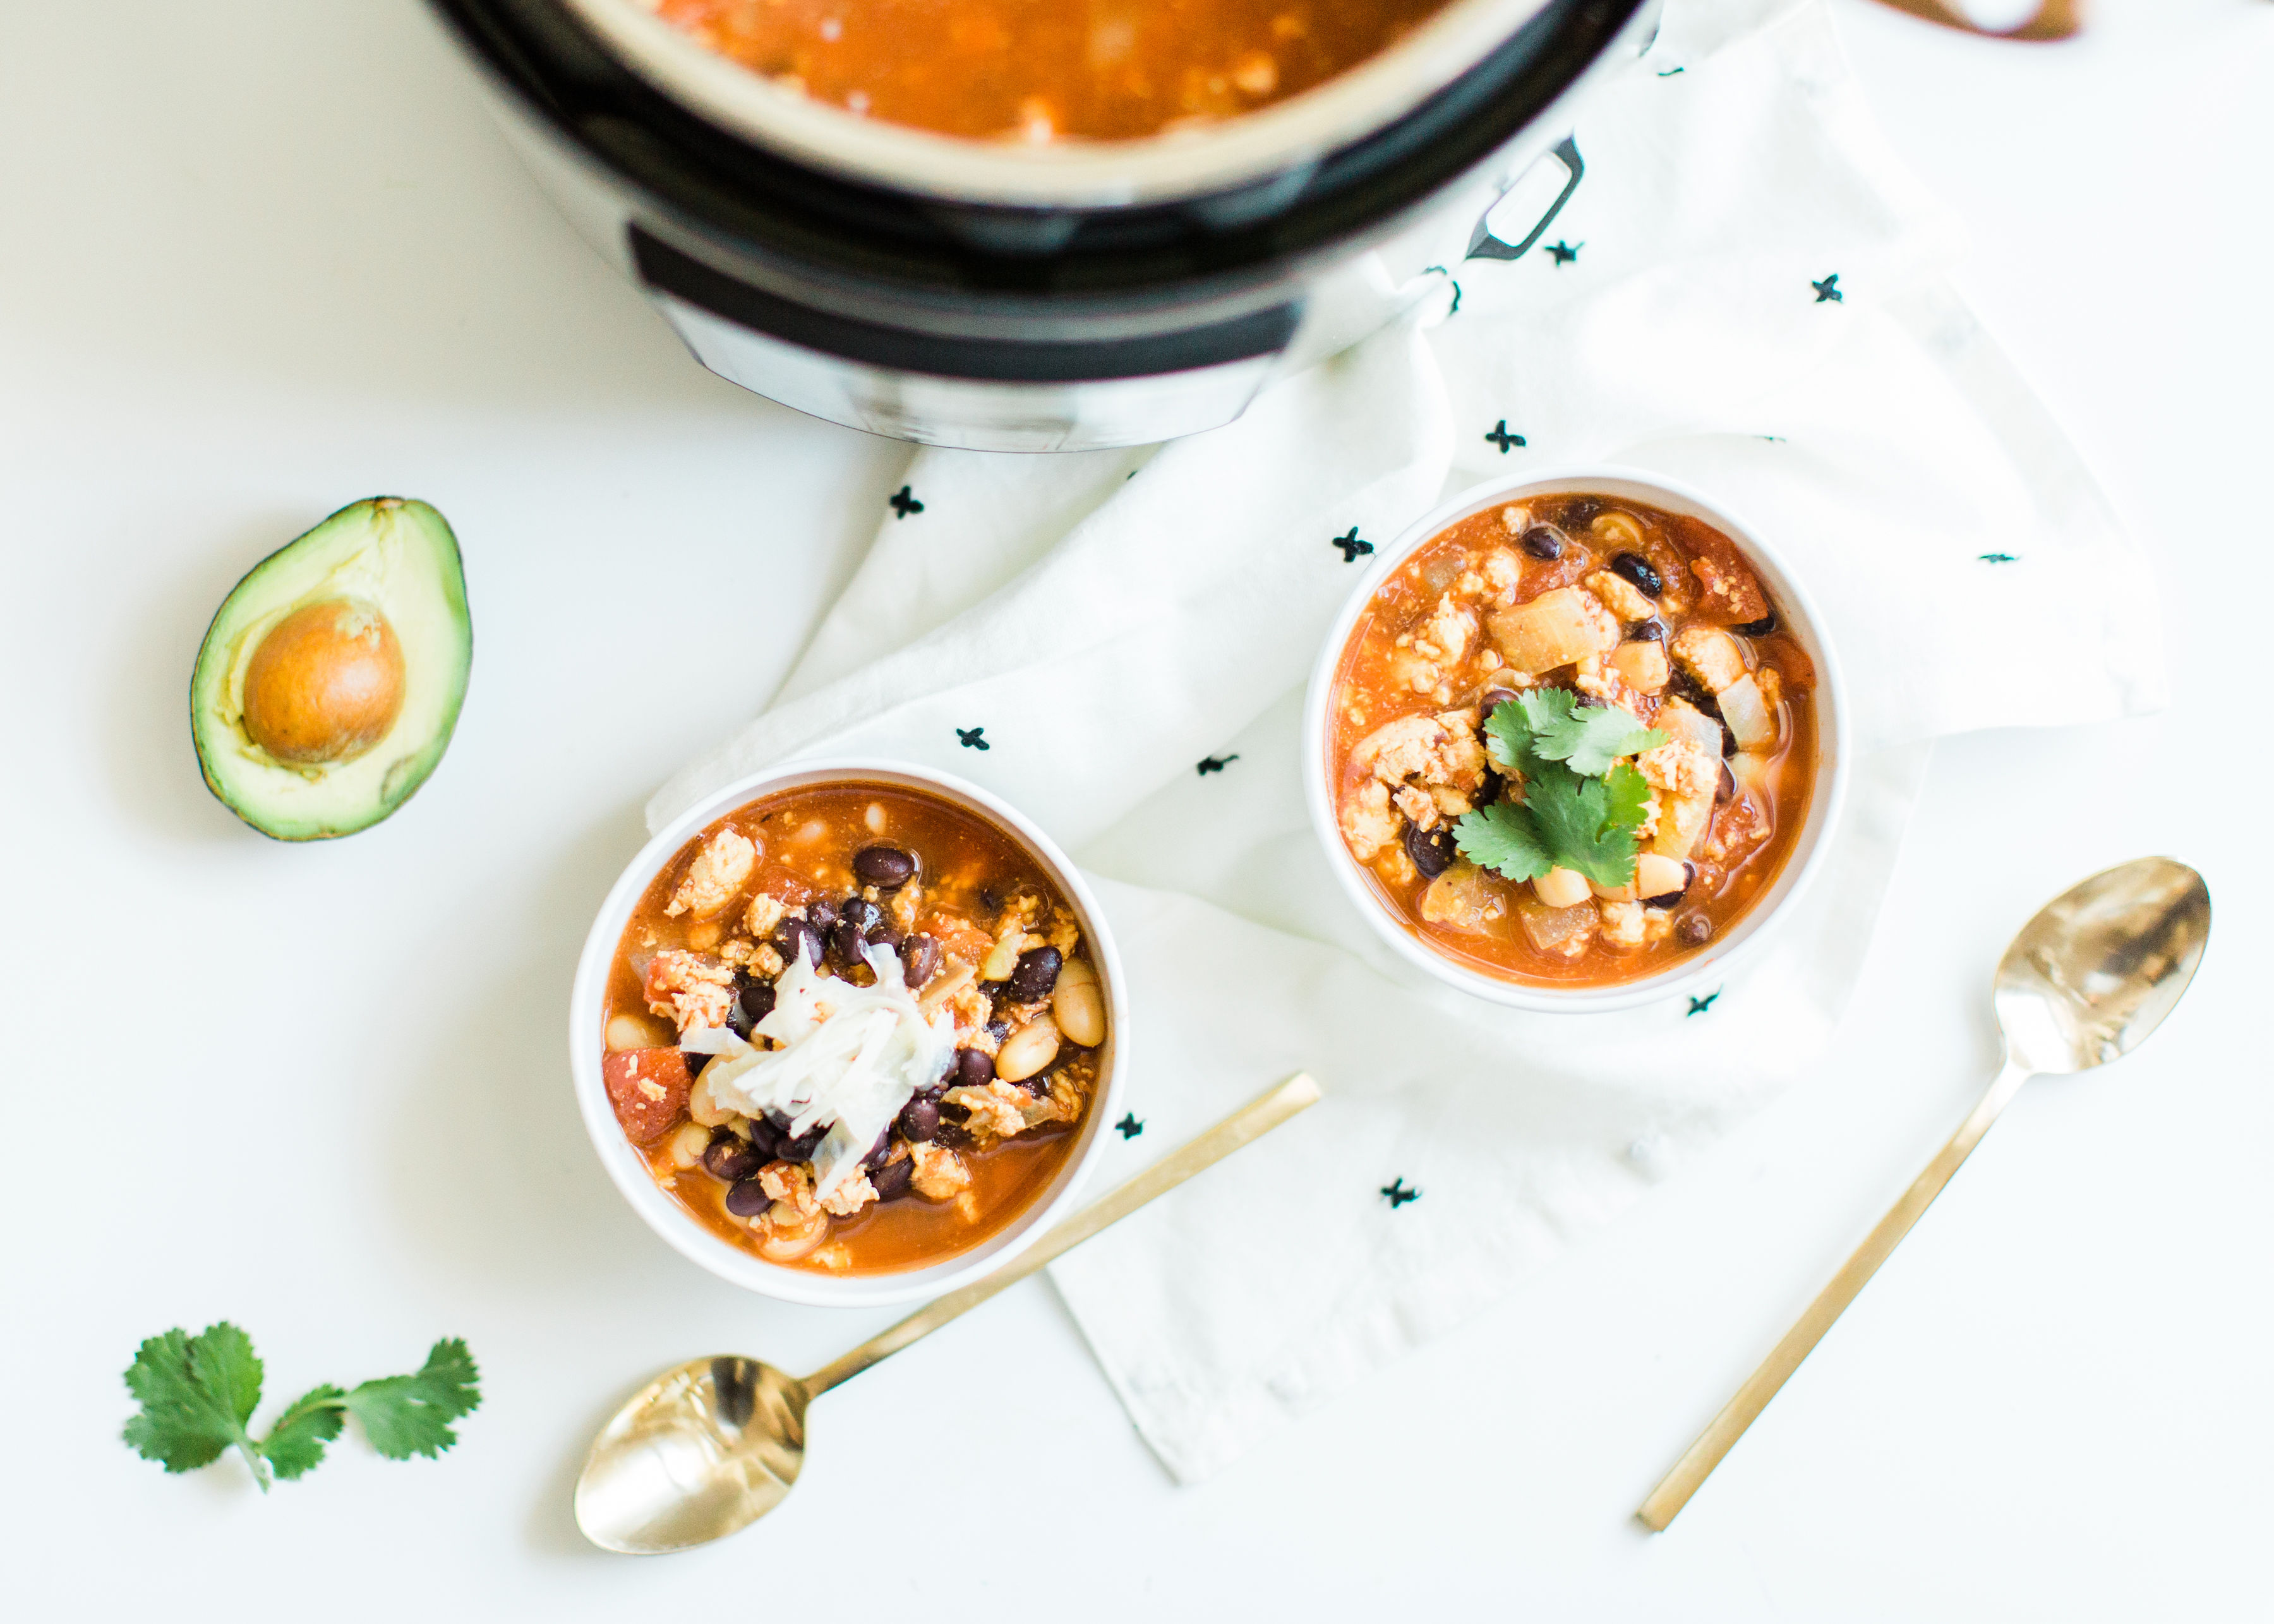 This easy and delicious ground chicken chili all comes together in an Instant Pot or crockpot. Serve this made ahead chili with yummy toppings and cornbread and enjoy an incredible, hearty, healthy, and simple meal. Click through for the recipe. | glitterinc.com | @glitterinc